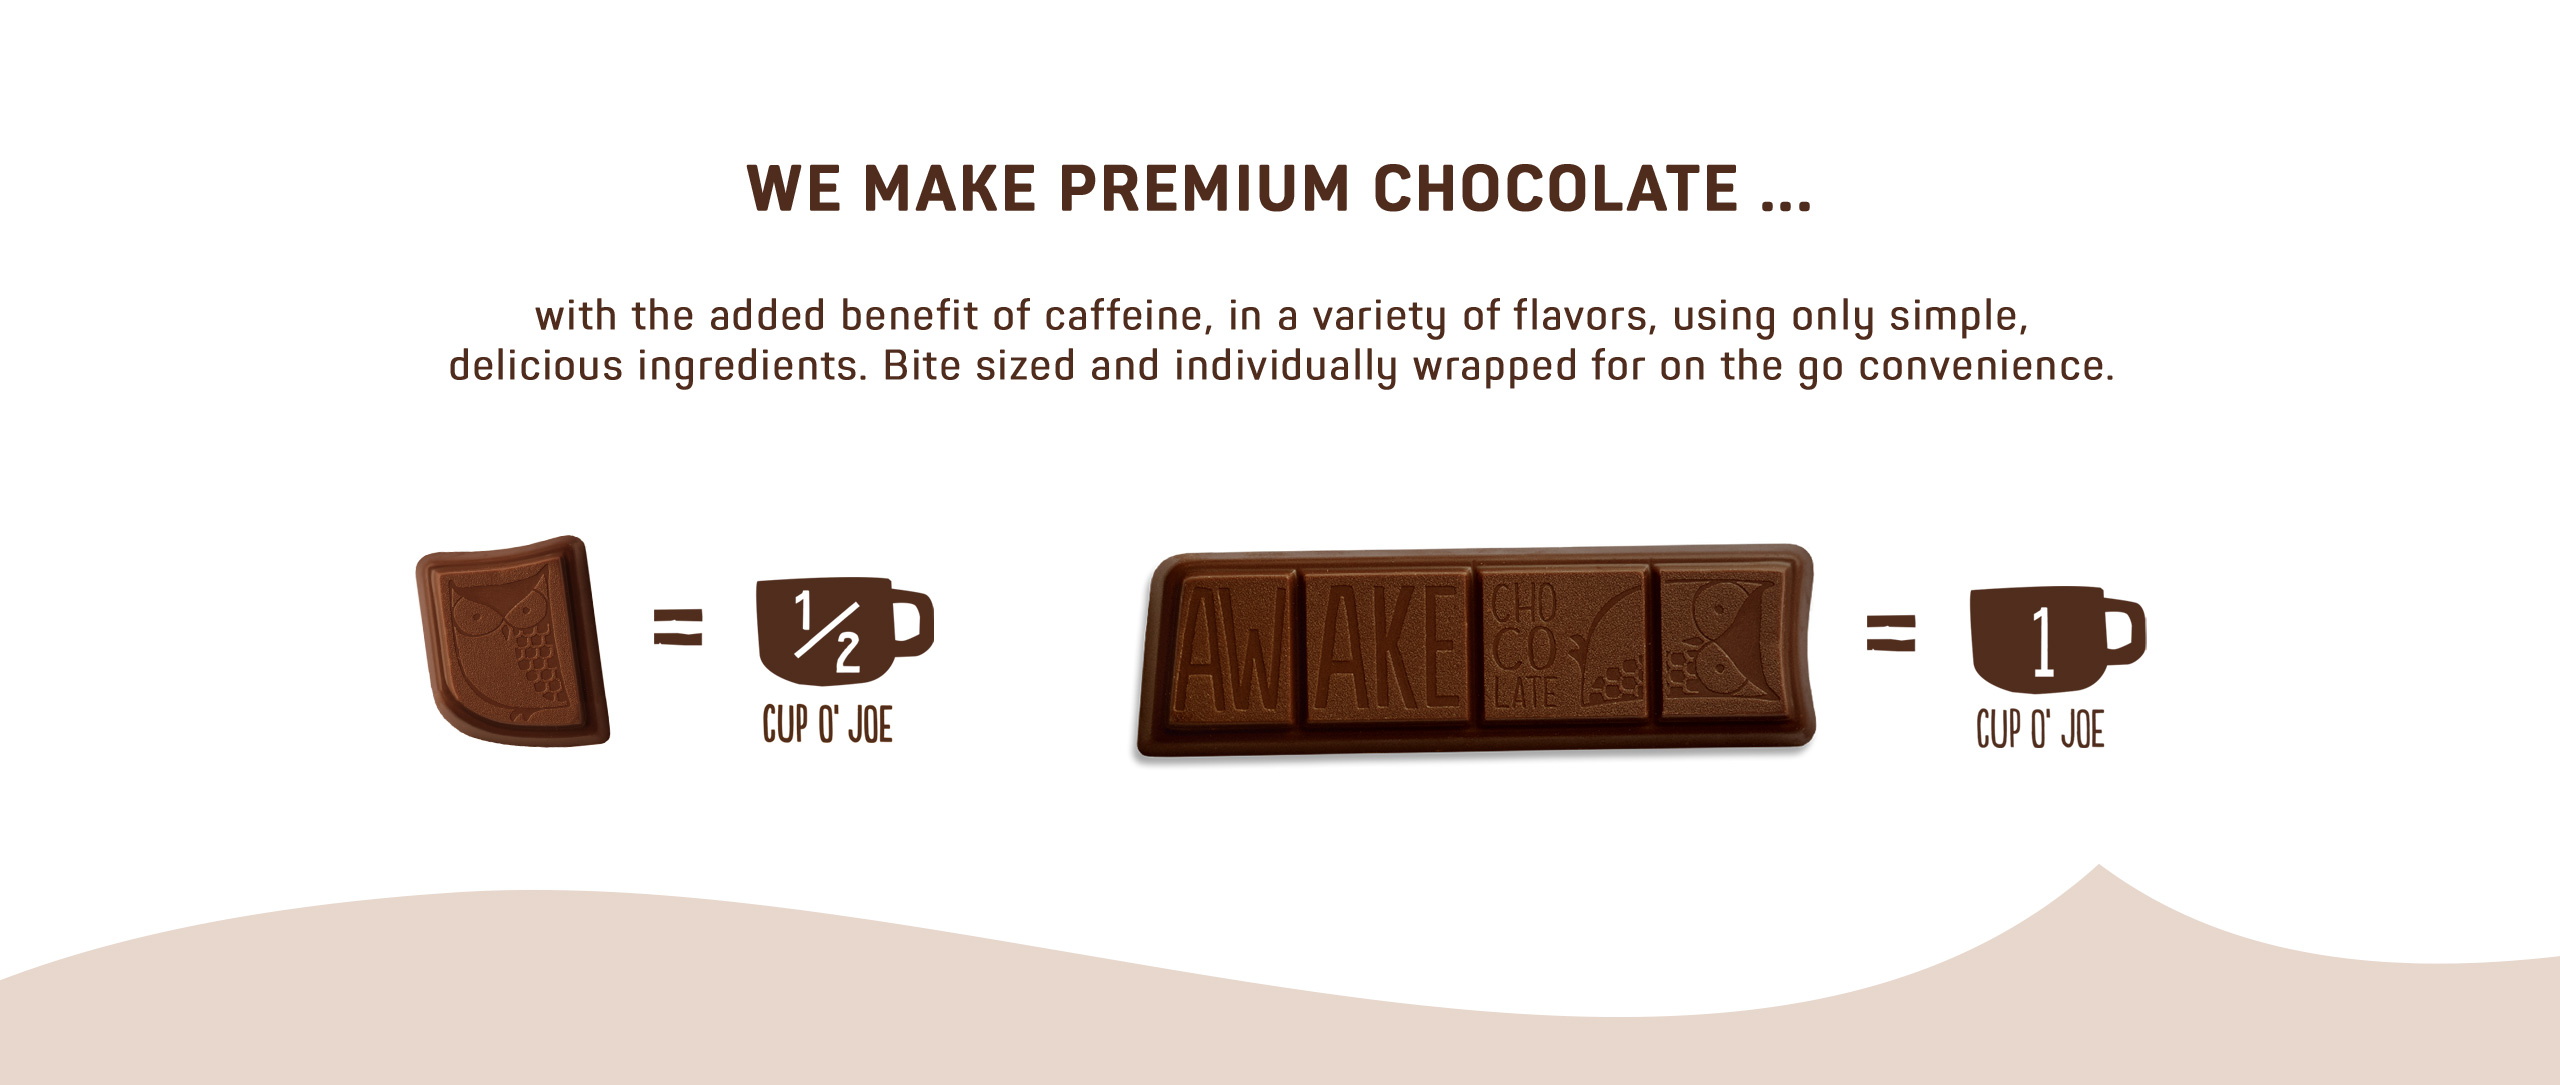 We make premium chocolate in a variety of flavors, made with a combination of high-quality chocolate, the benefit of caffeine, simple, delicious ingredients, and no-mess convenience. One mini-bite equals one half cup of joe. One bar equals one cup of joe.